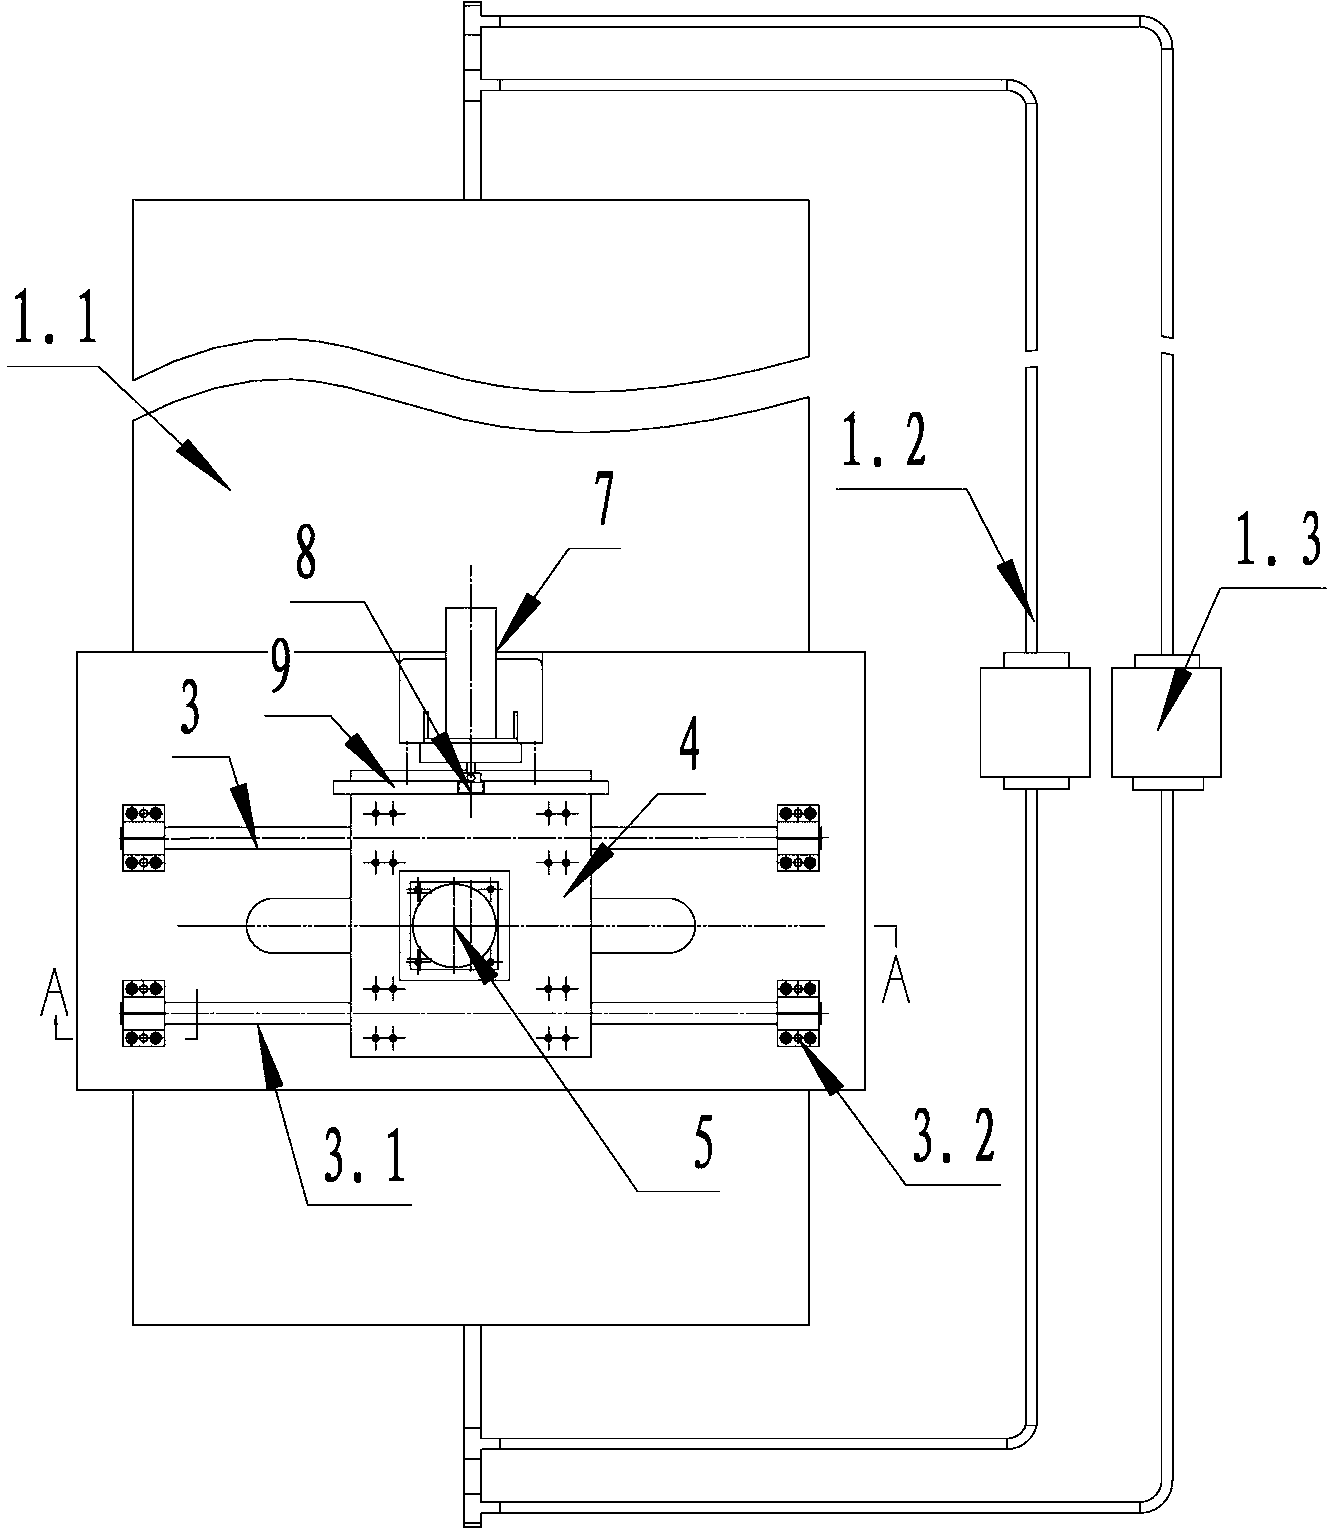 Oscillatory type tidal current power generation capture efficiency testing device